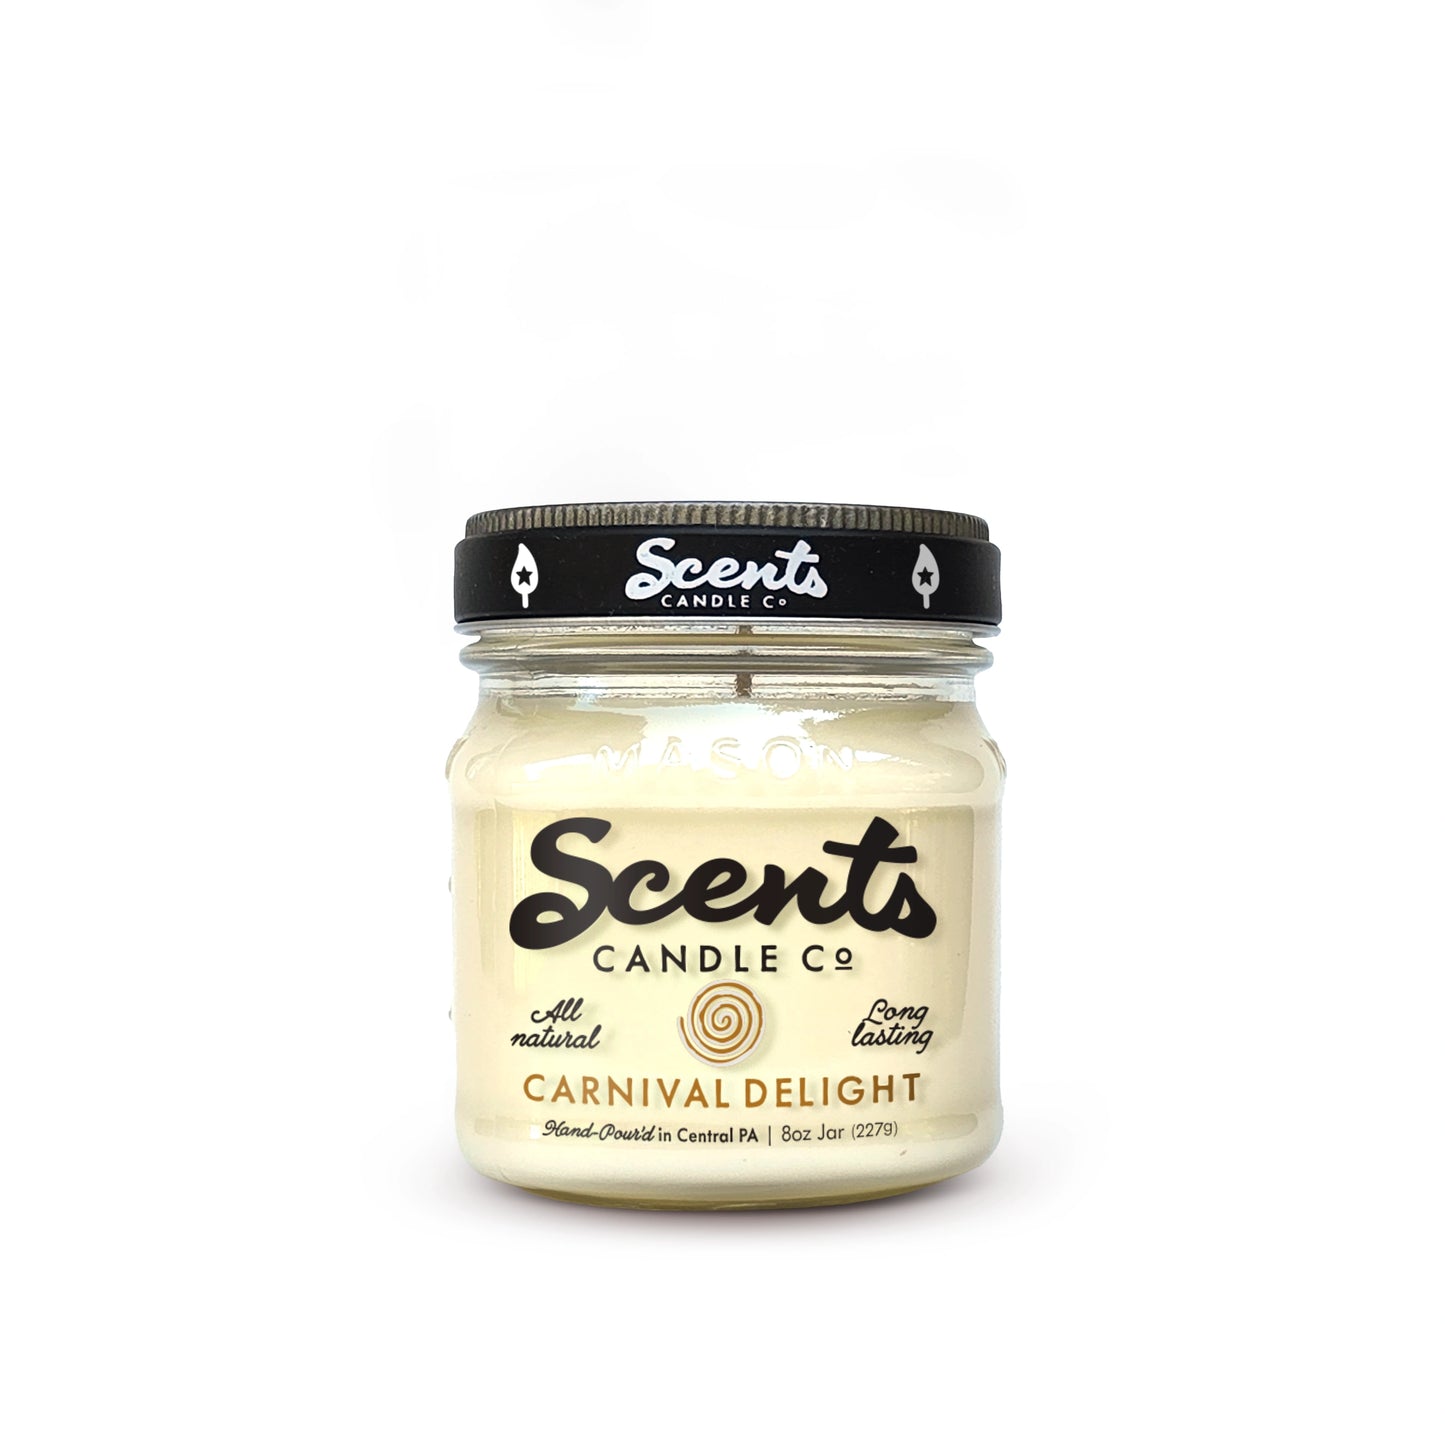 Scents Candle Co. Carnival Delight Soy Wax Candles